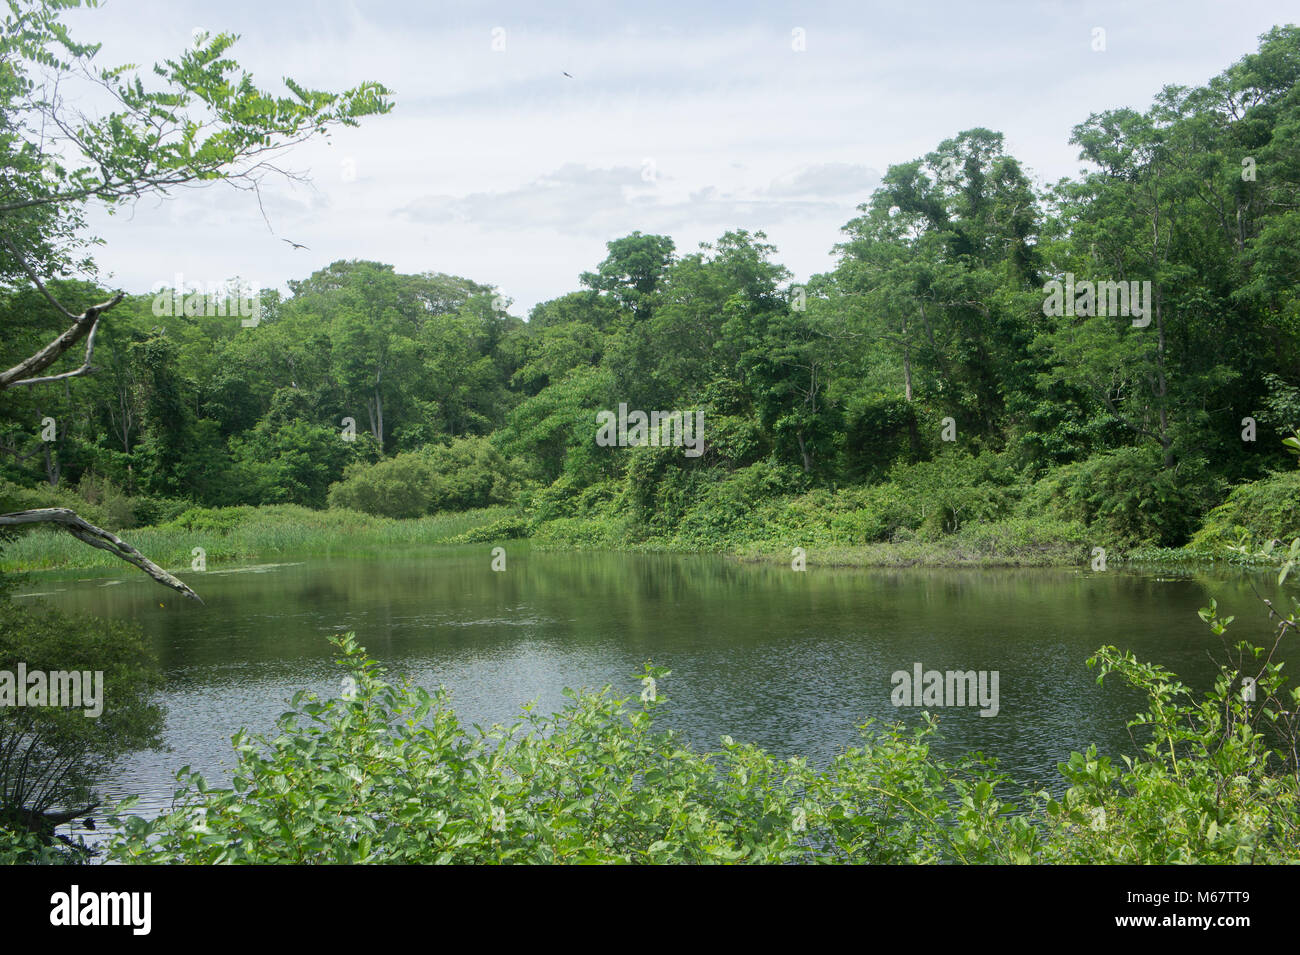 Mashpee River in the summer, cape cod, Massachusetts. Part of the river flows through parks that are kept up by the Trustees of reservations. Stock Photo